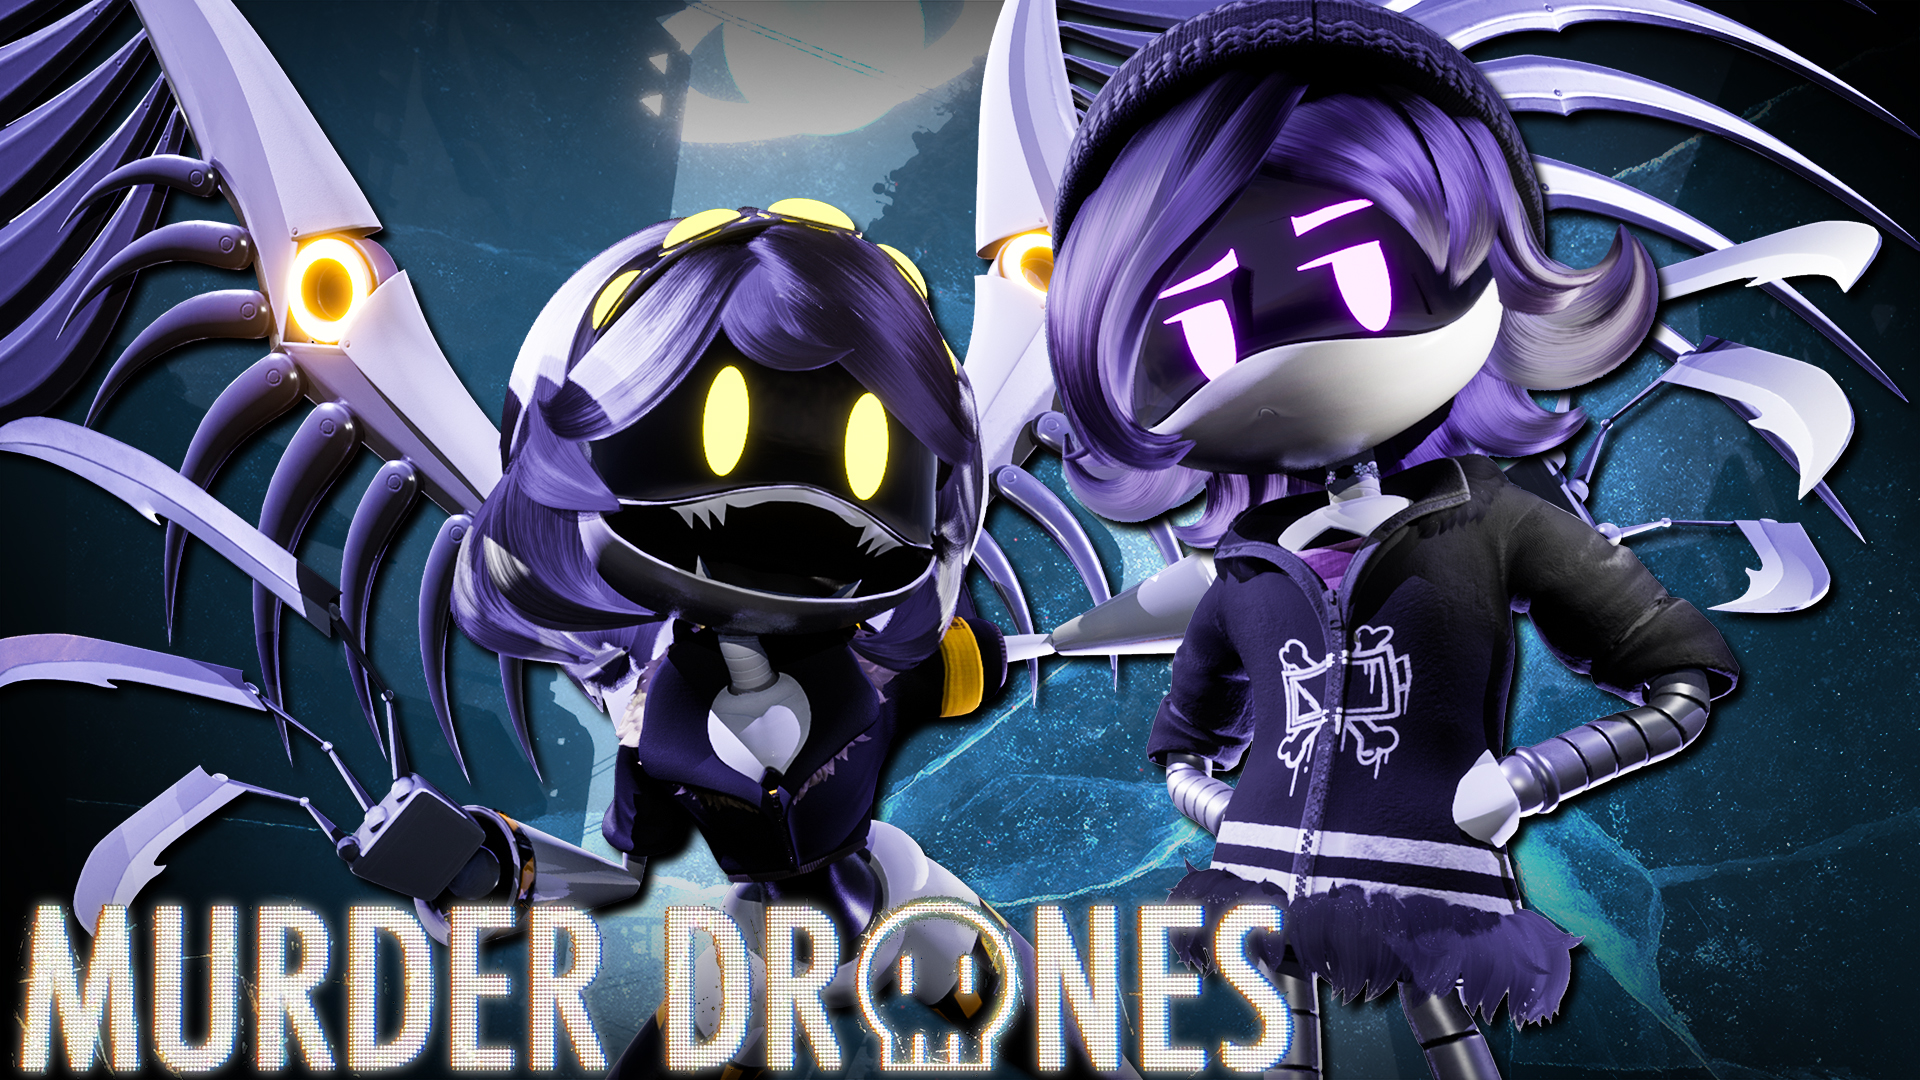 Twitter 上的GLITCH：Absolutely blown away by all the amazing fan response for Murder Drones. Thank you all so much, we're so glad you liked the show